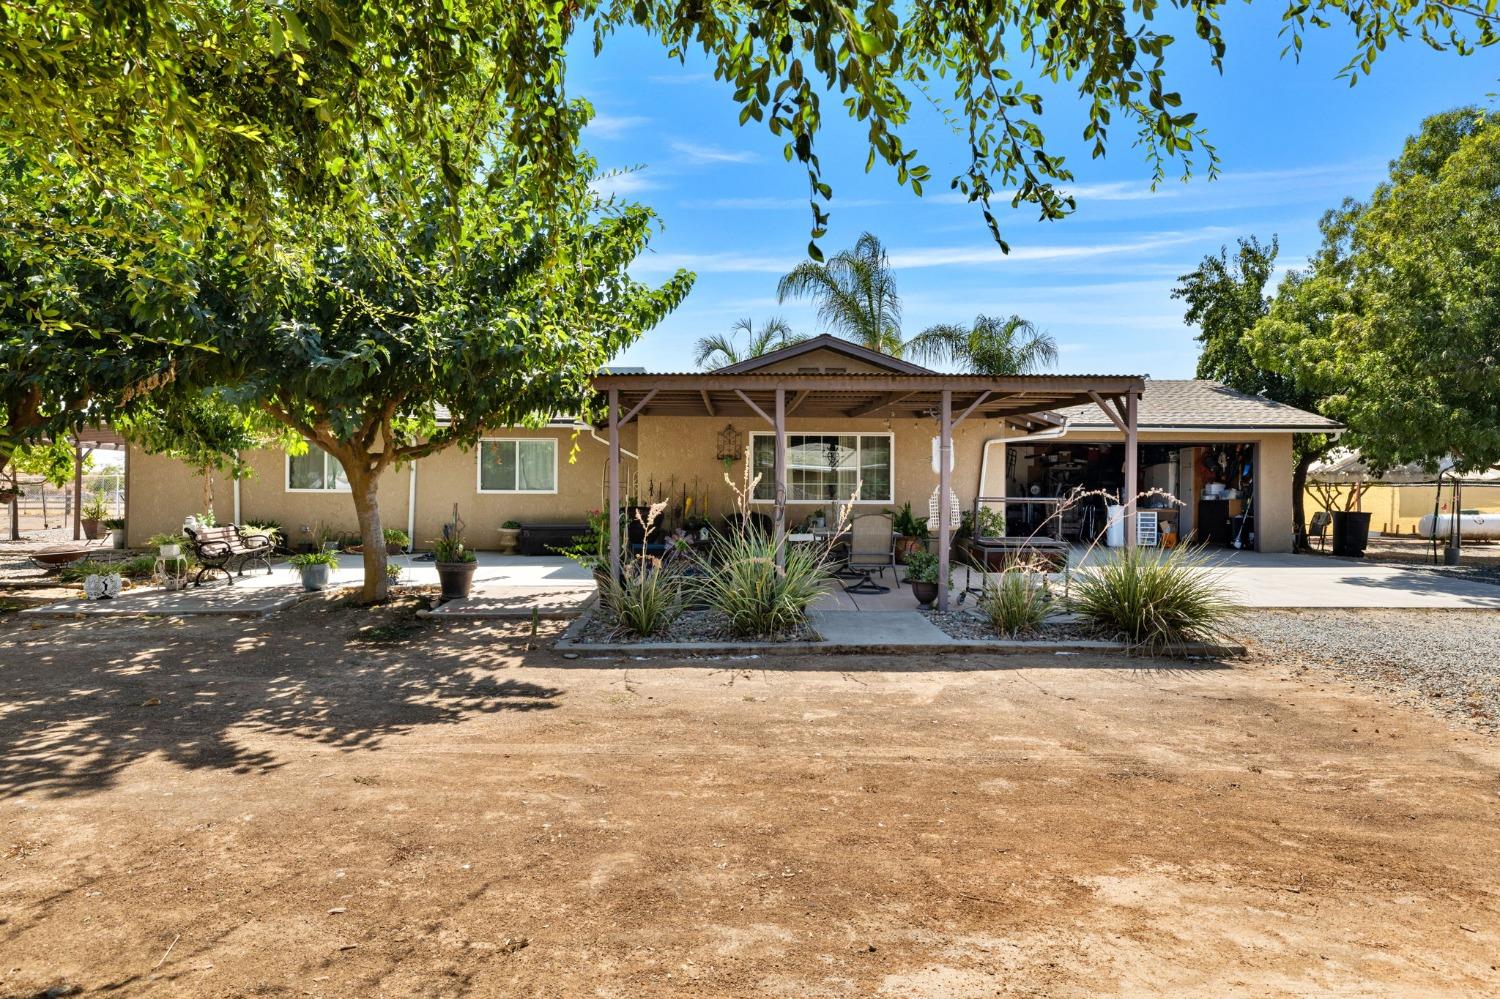 Come take a look at this very well maintained country home.  The home is situated on almost an acre of land with full perimeter fencing.  Pride of ownership truly shows on the inside and out! 10 minute drive to the El Paseo Marketplace shopping center.  Great value, a must see!